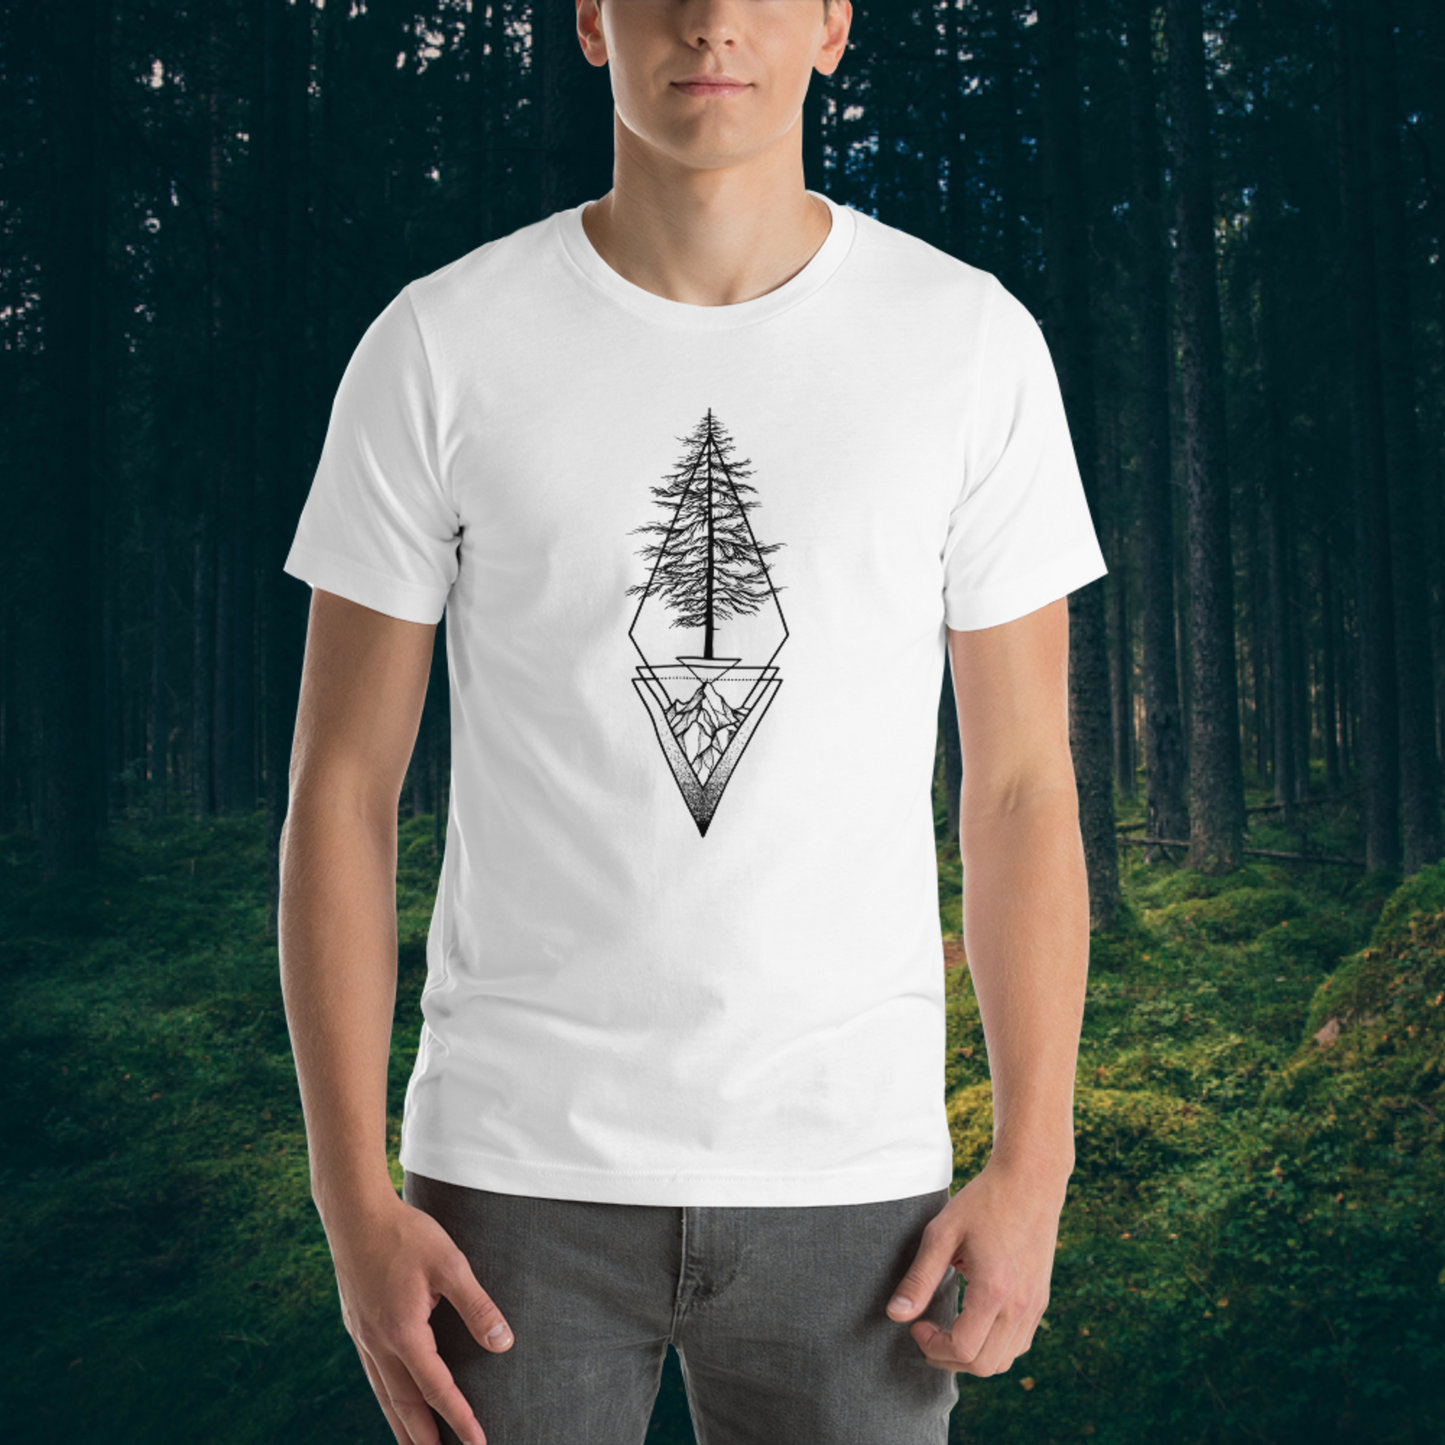 Mountain Picea - Cotton Graphic Tees, Shirts for Men, Tee Shirts for Women